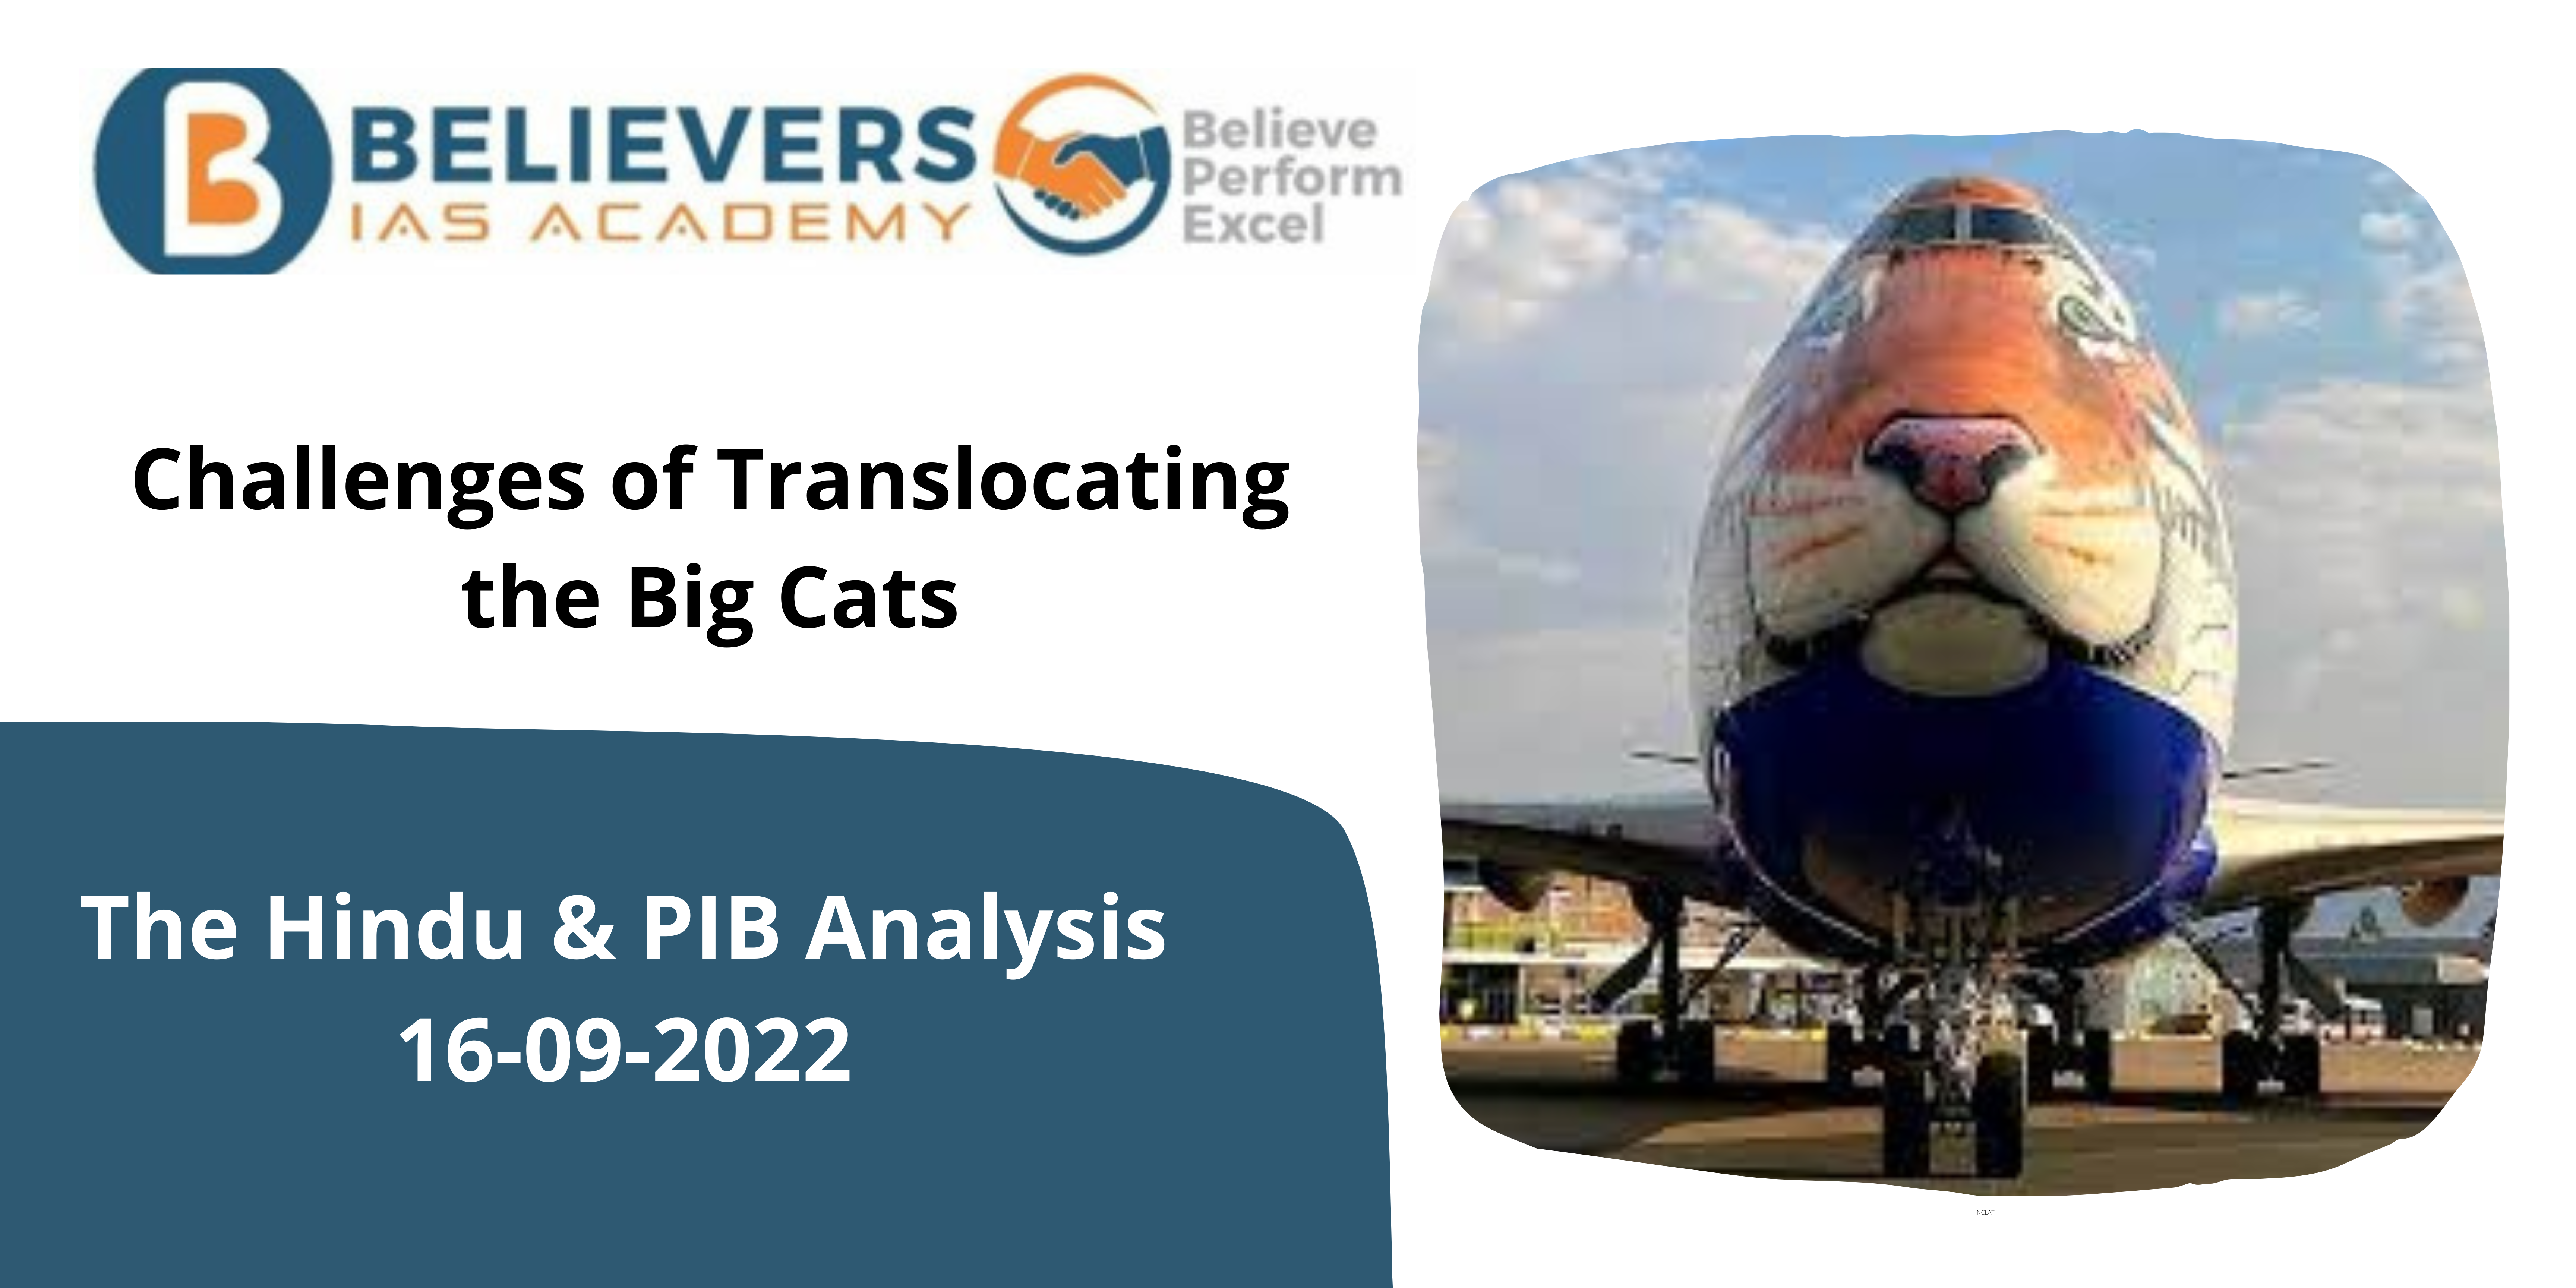 Challenges of Translocating the Big Cats